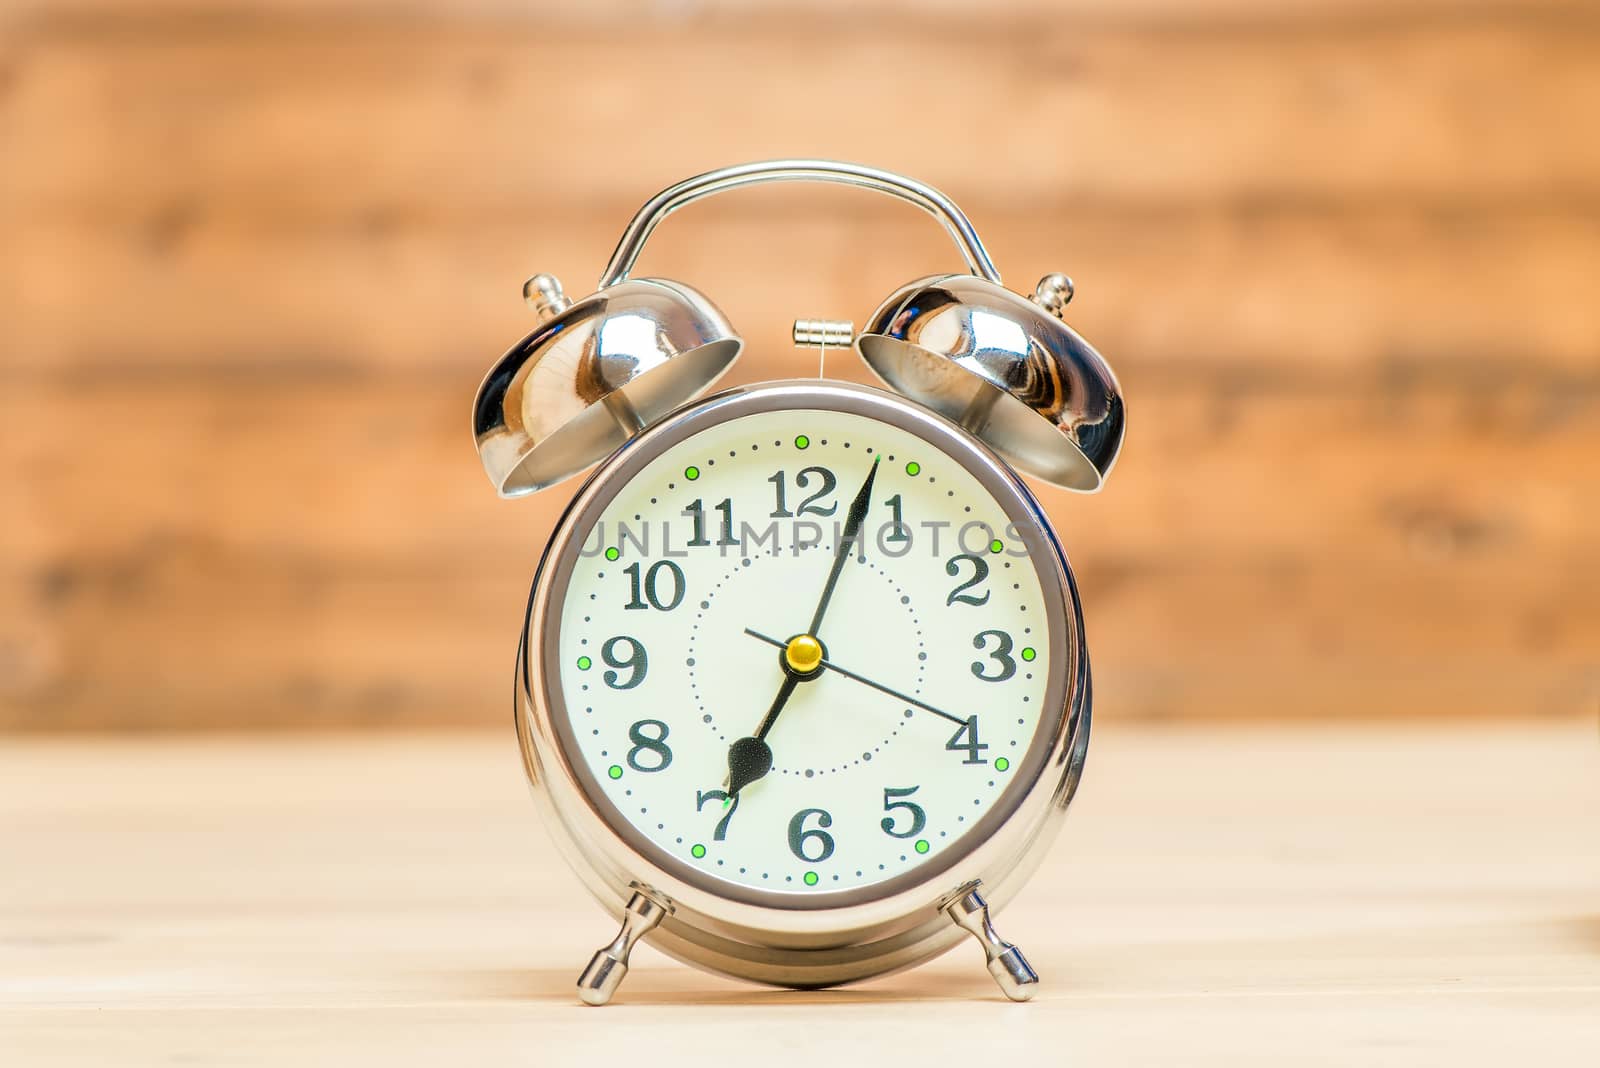 Silver alarm clock in retro style on a wooden background close-up shows 7 am